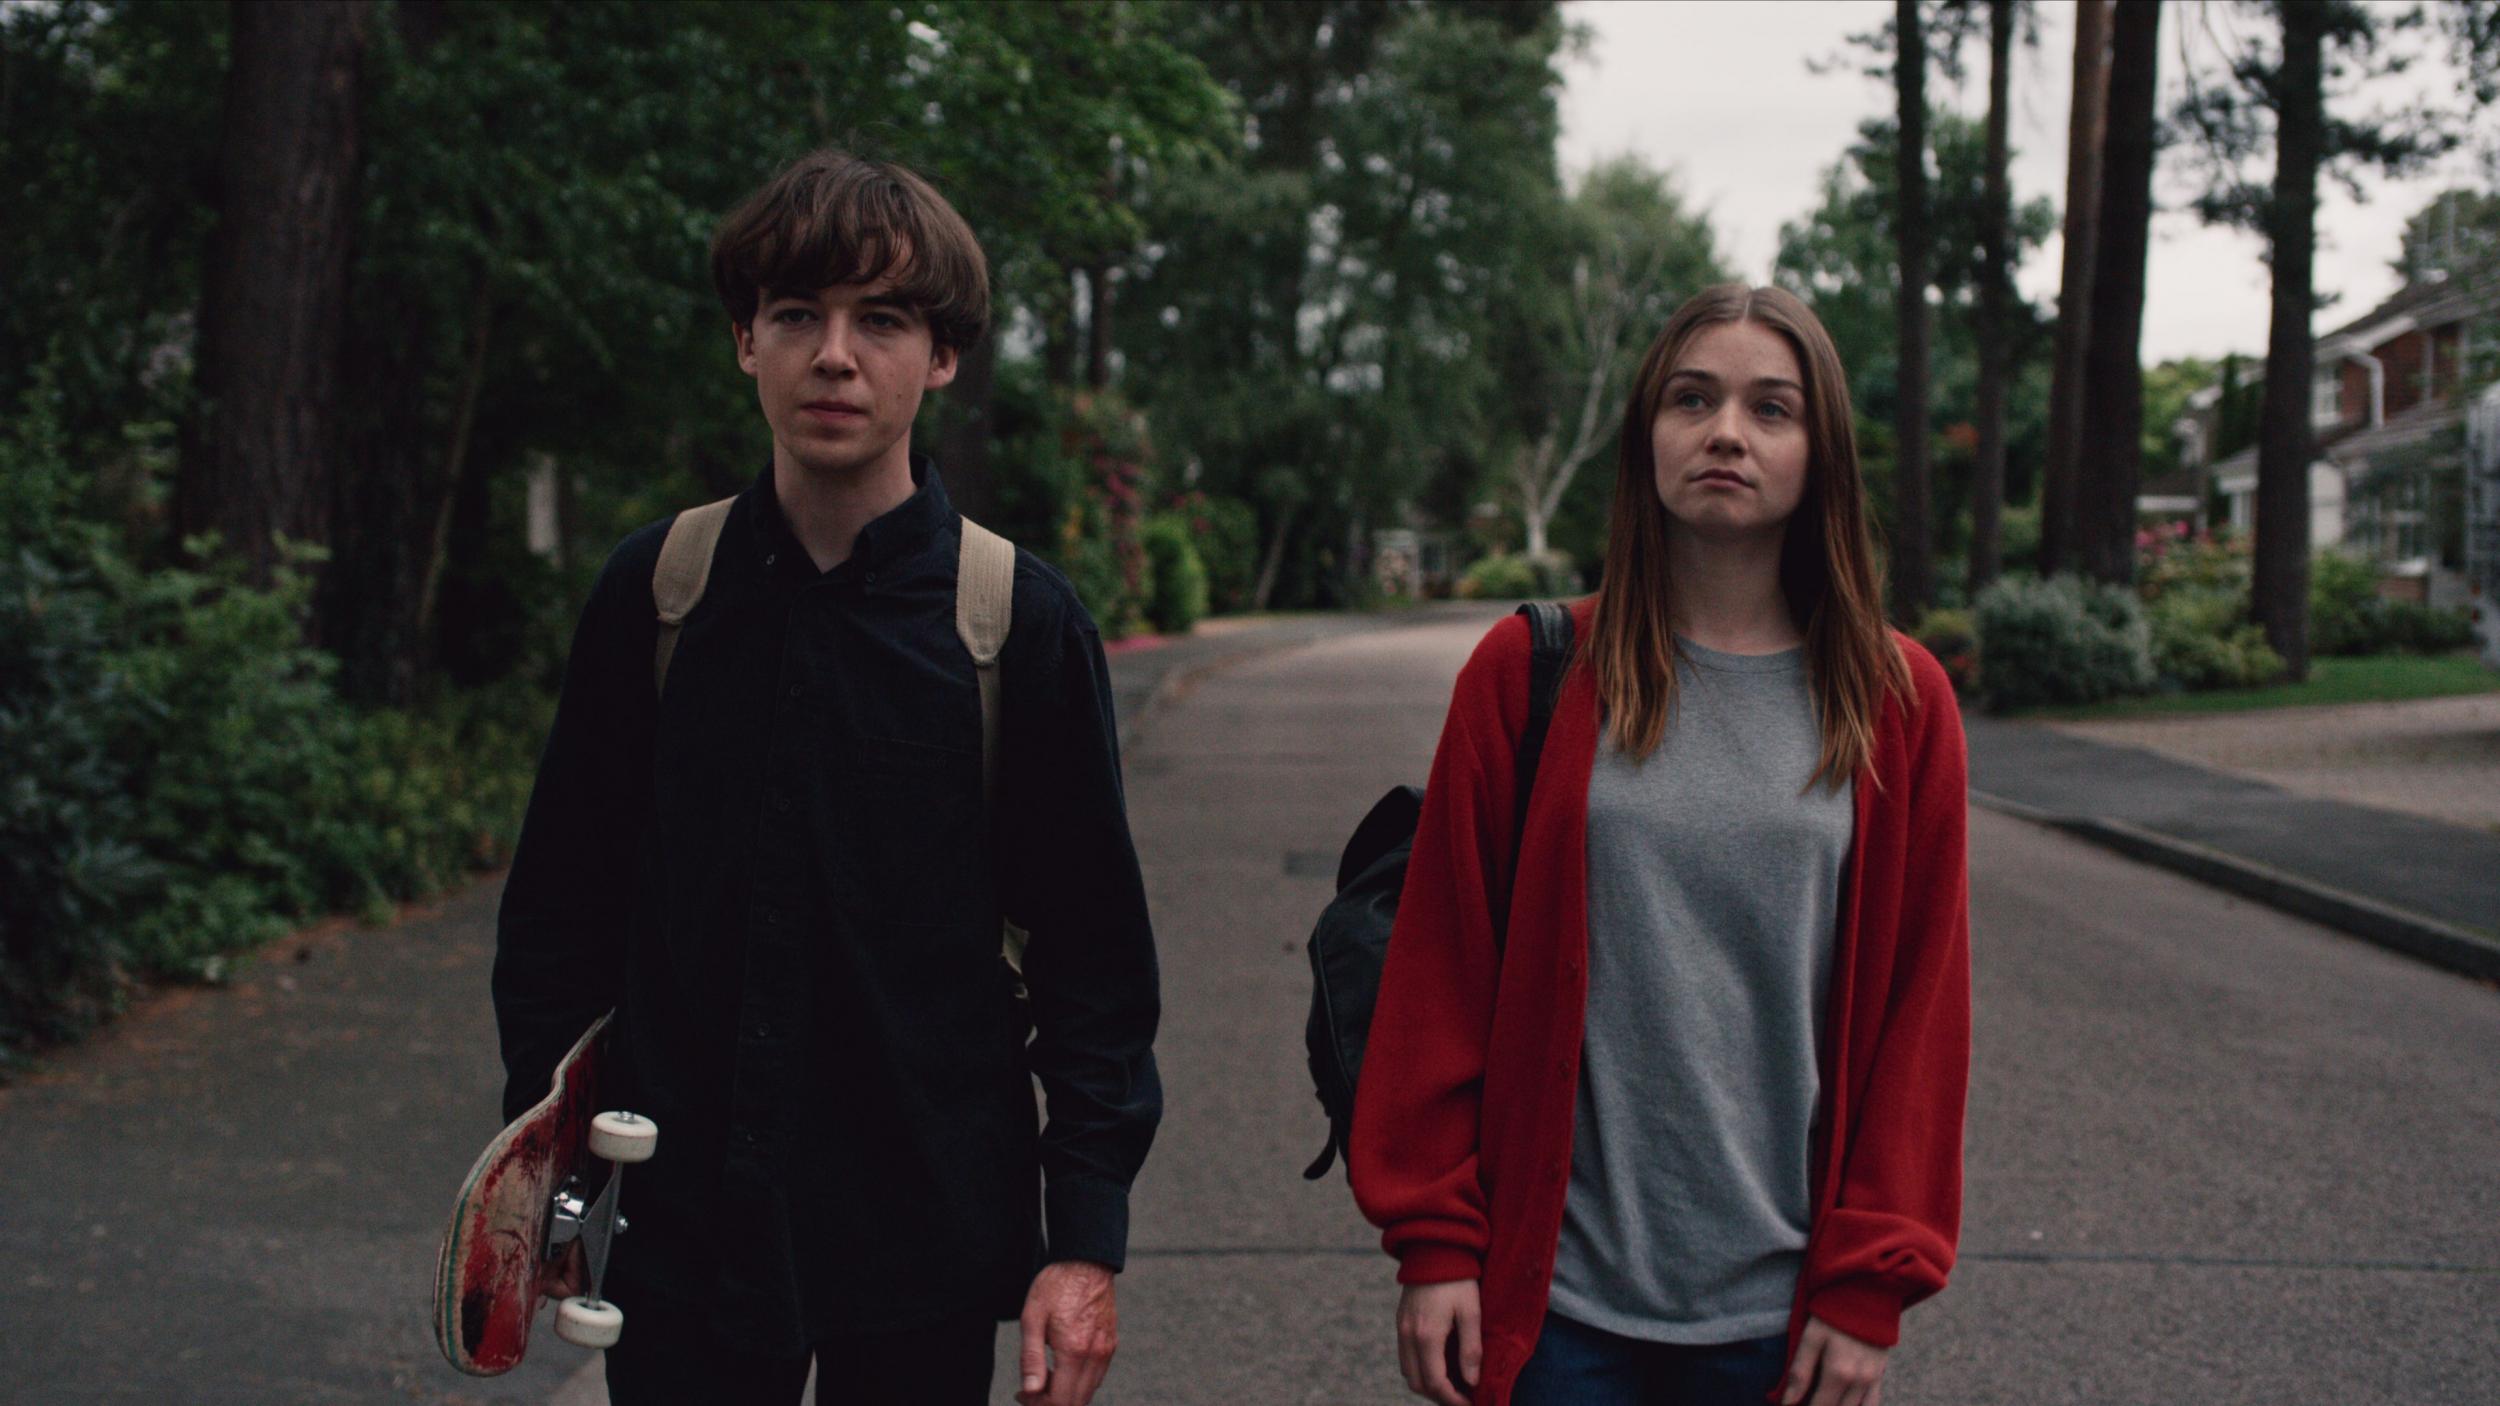 Alex Lawther as James and Barden as Alyssa in ‘The End of the F***ing World’ season one